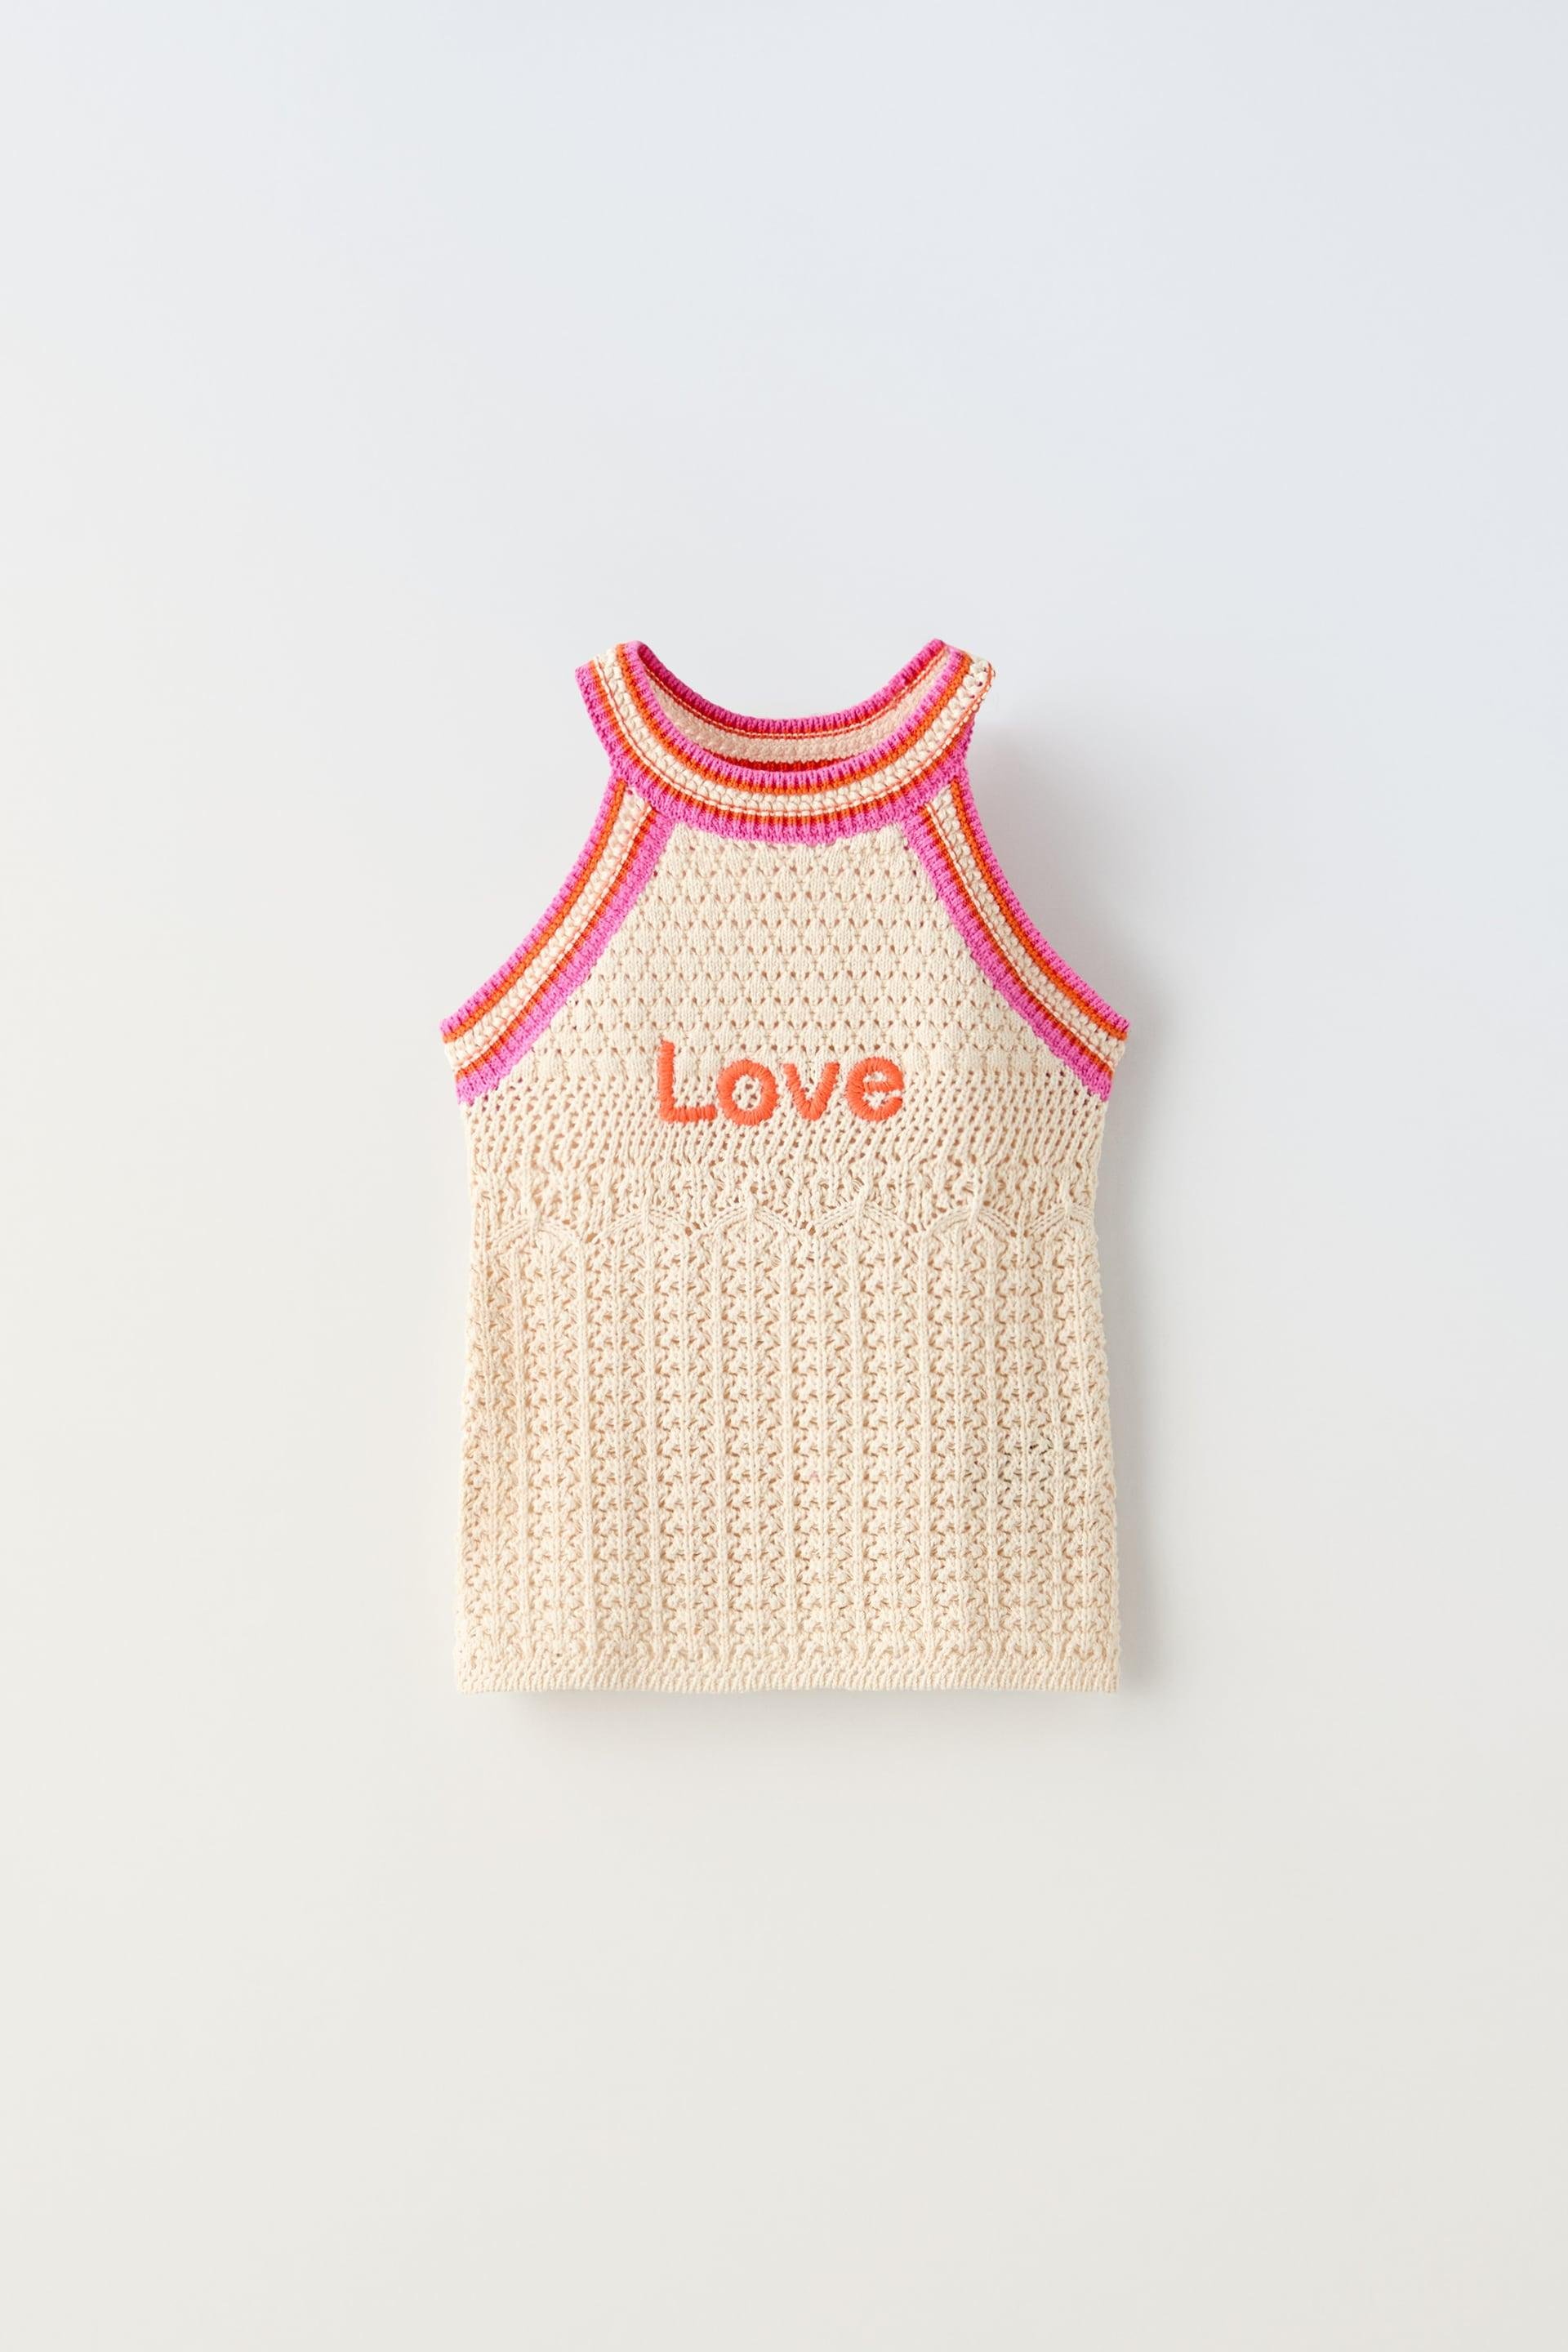 EMBROIDERED TEXT CROCHET TOP by ZARA